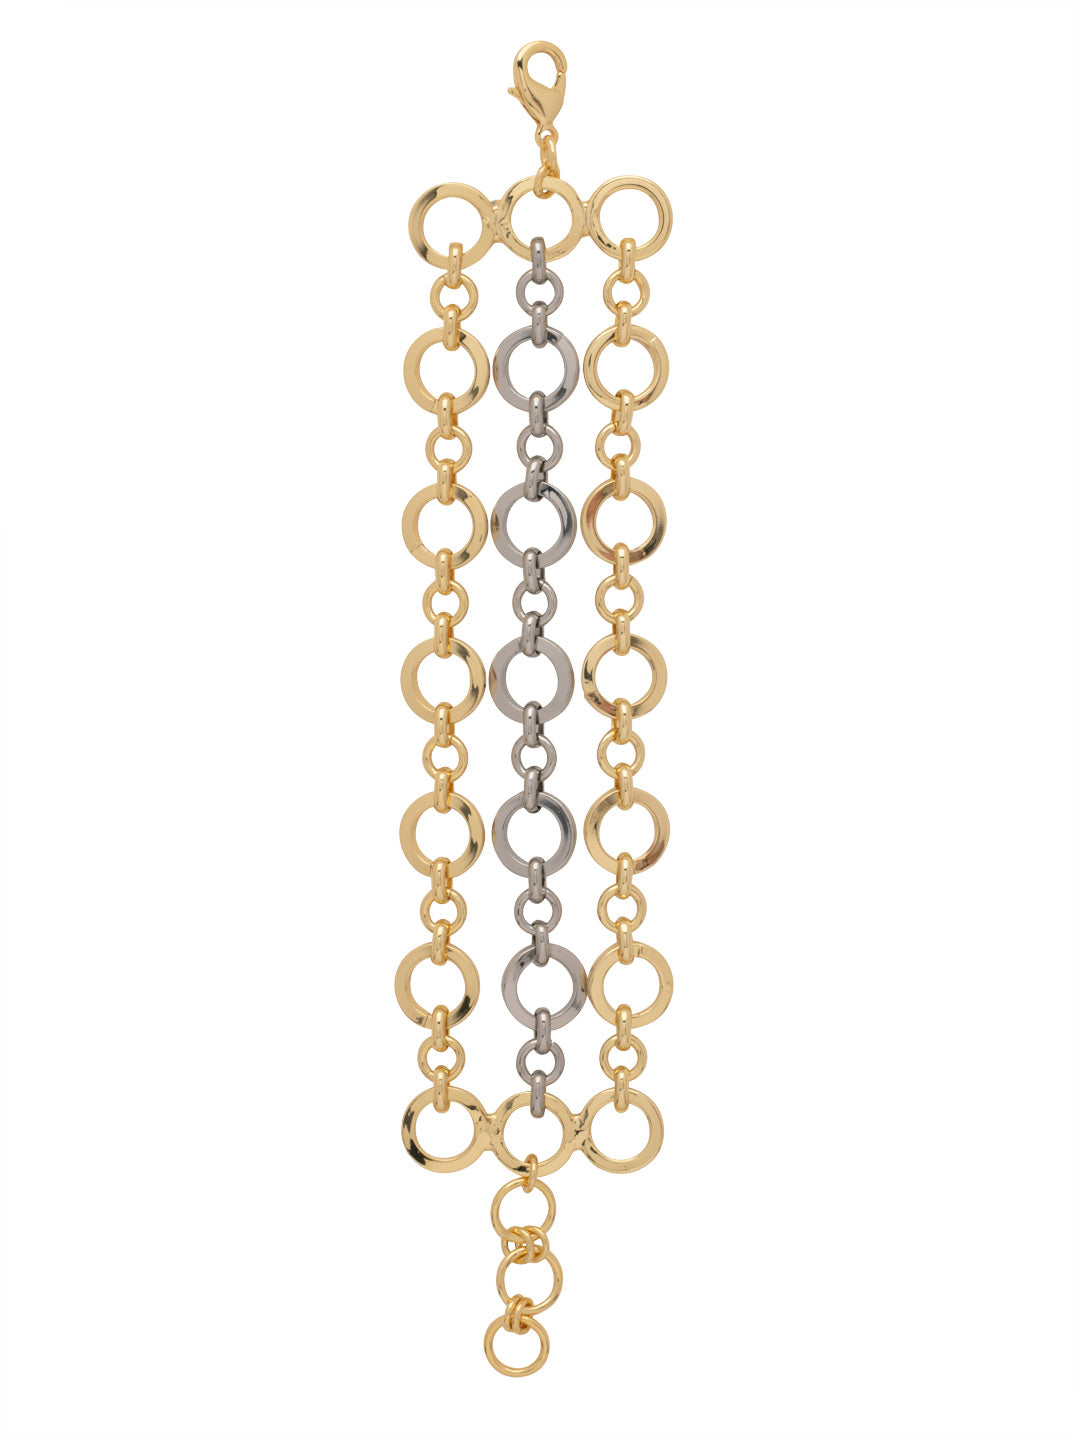 Rhodri Layered Bracelet - 4BFF15MXMTL - <p>The Rhodri Layered Bracelet features three bold layers of round link chains as a single, adjustable bracelet secured by a lobster claw clasp. From Sorrelli's Bare Metallic collection in our Mixed Metal finish.</p>